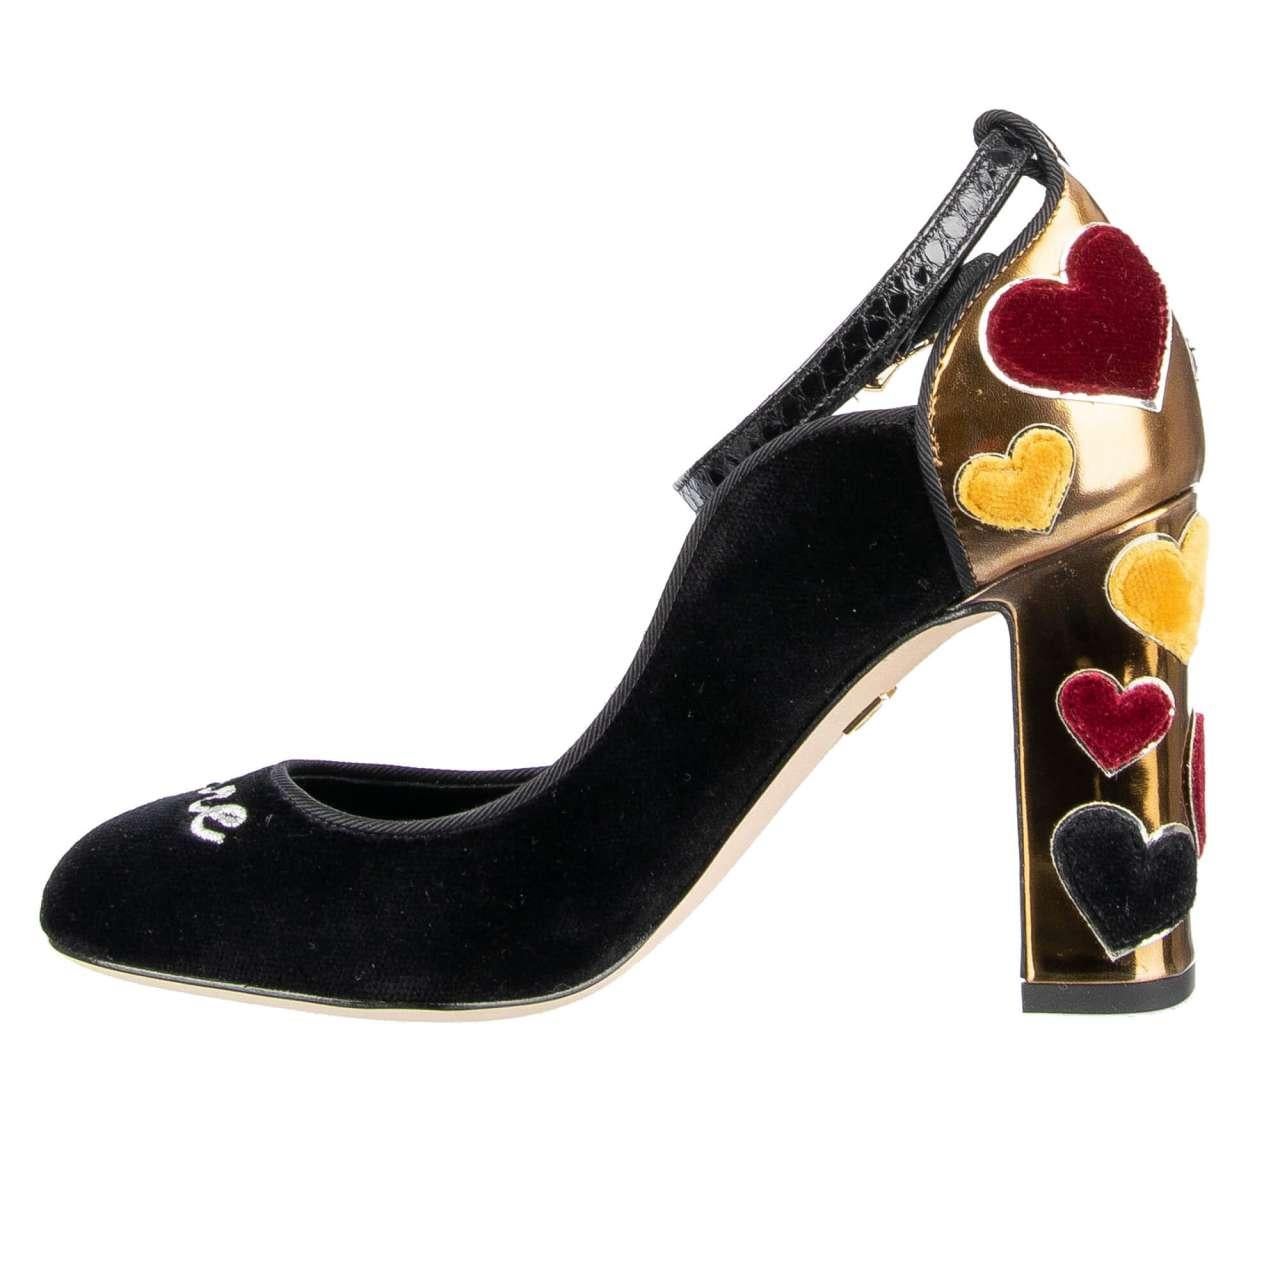 - Velvet Ankle Strap Pumps VALLY in black and gold with silver embroidered L'Amore, hearts embellished block heel and snakeskin ankle strap by DOLCE & GABBANA - New with Box - MADE IN ITALY - Former RRP: EUR 795 - Silver Embroidered 